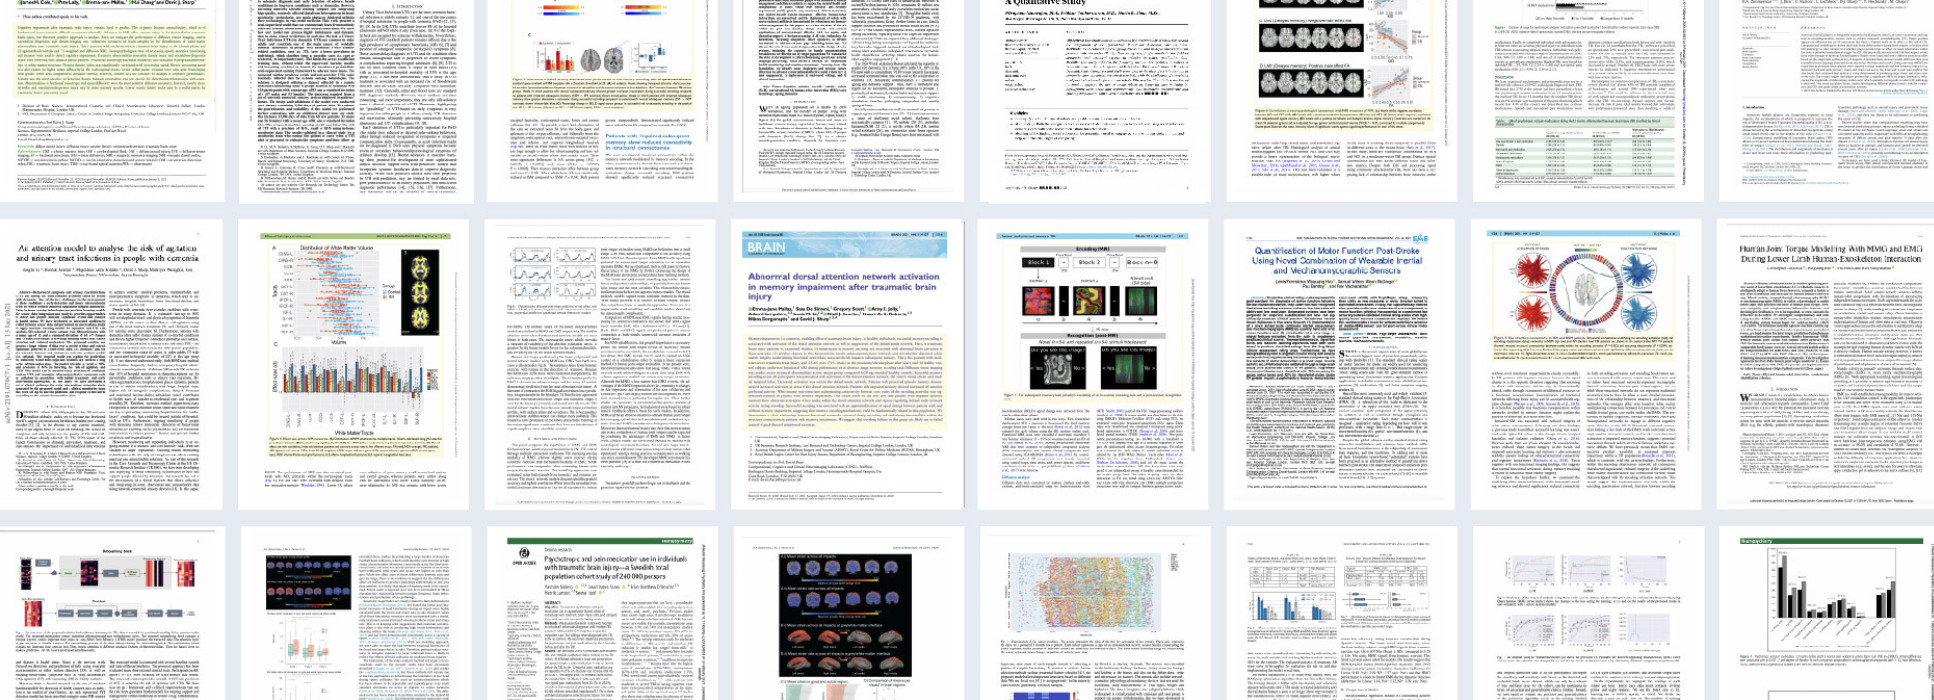 Collage of published research papers